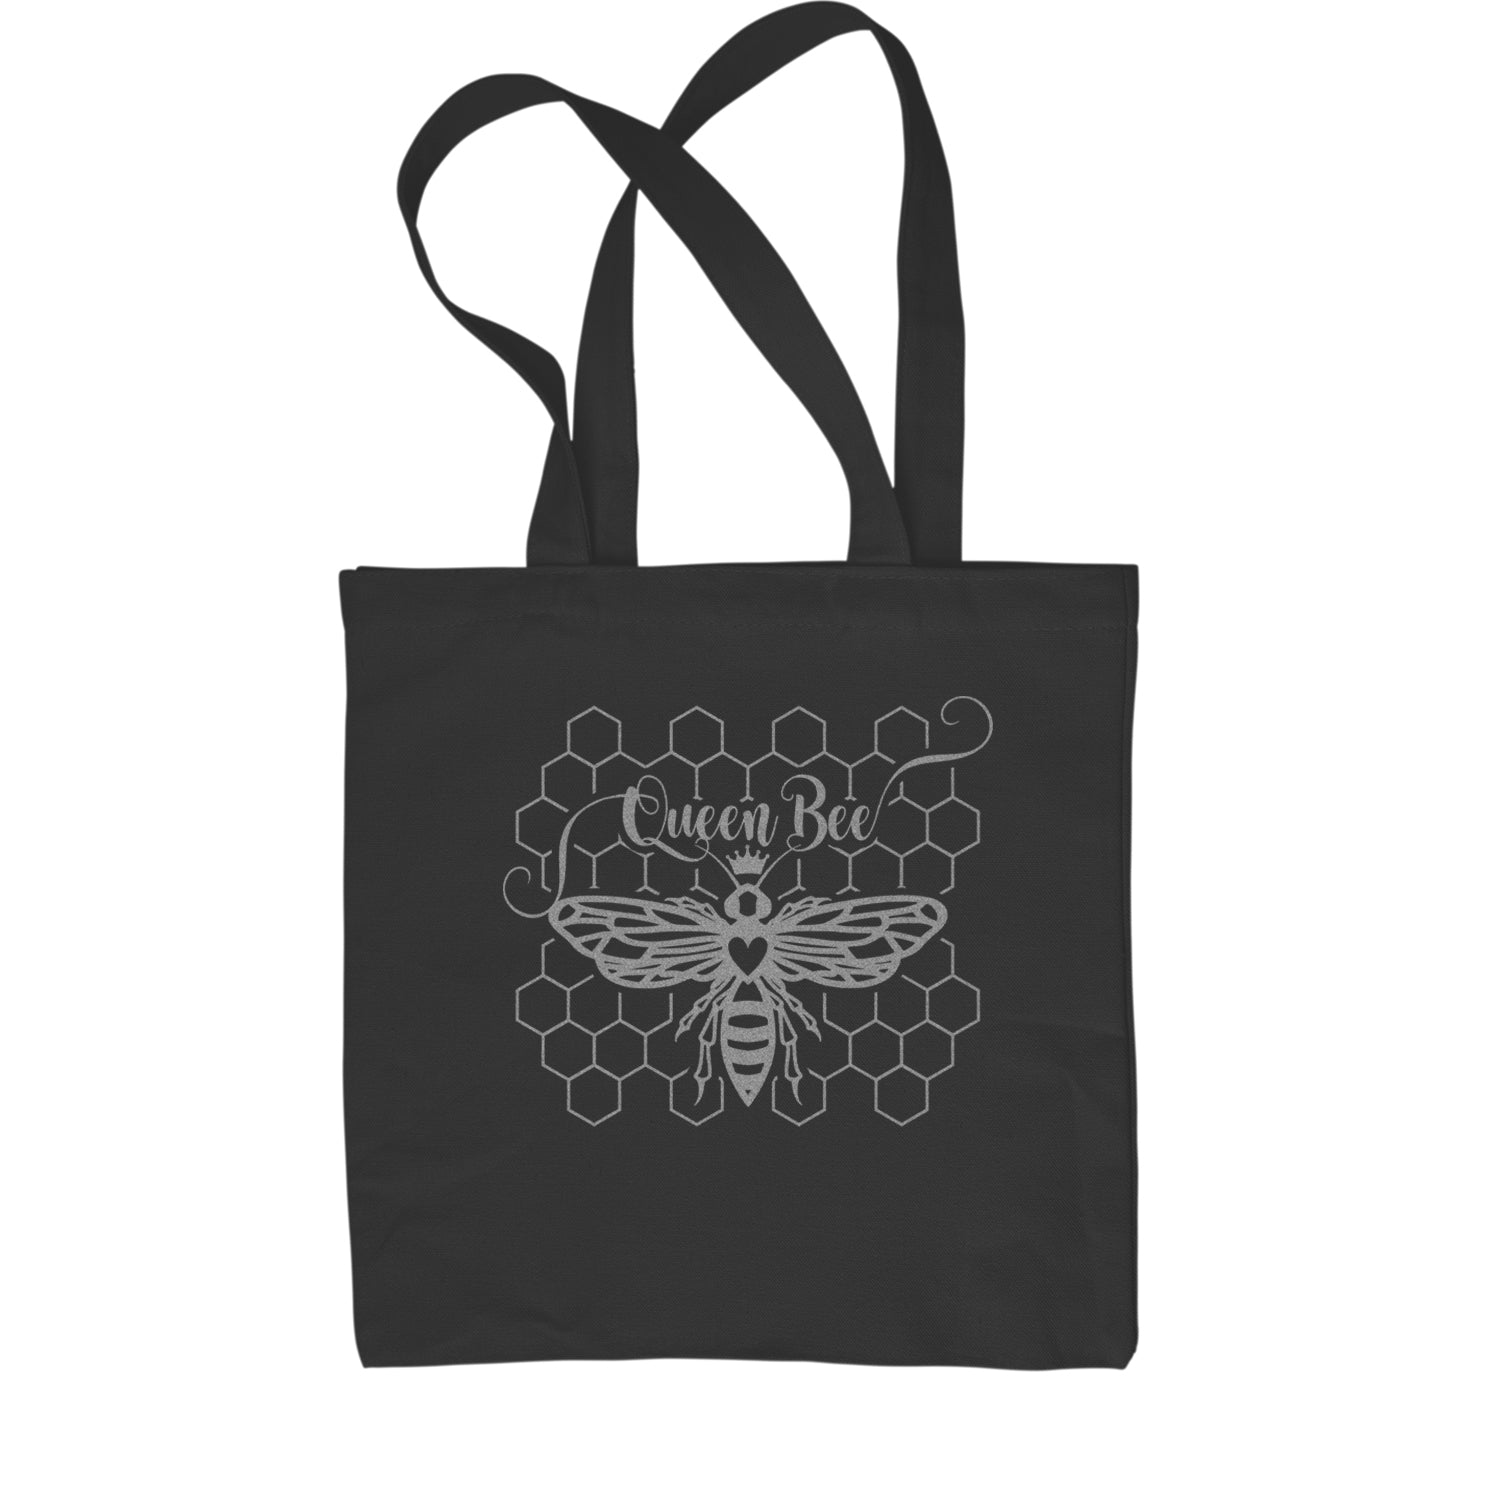 Beehive Queen Bee Metallic Silver Witty Bee Hive Design Shopping Tote Bag